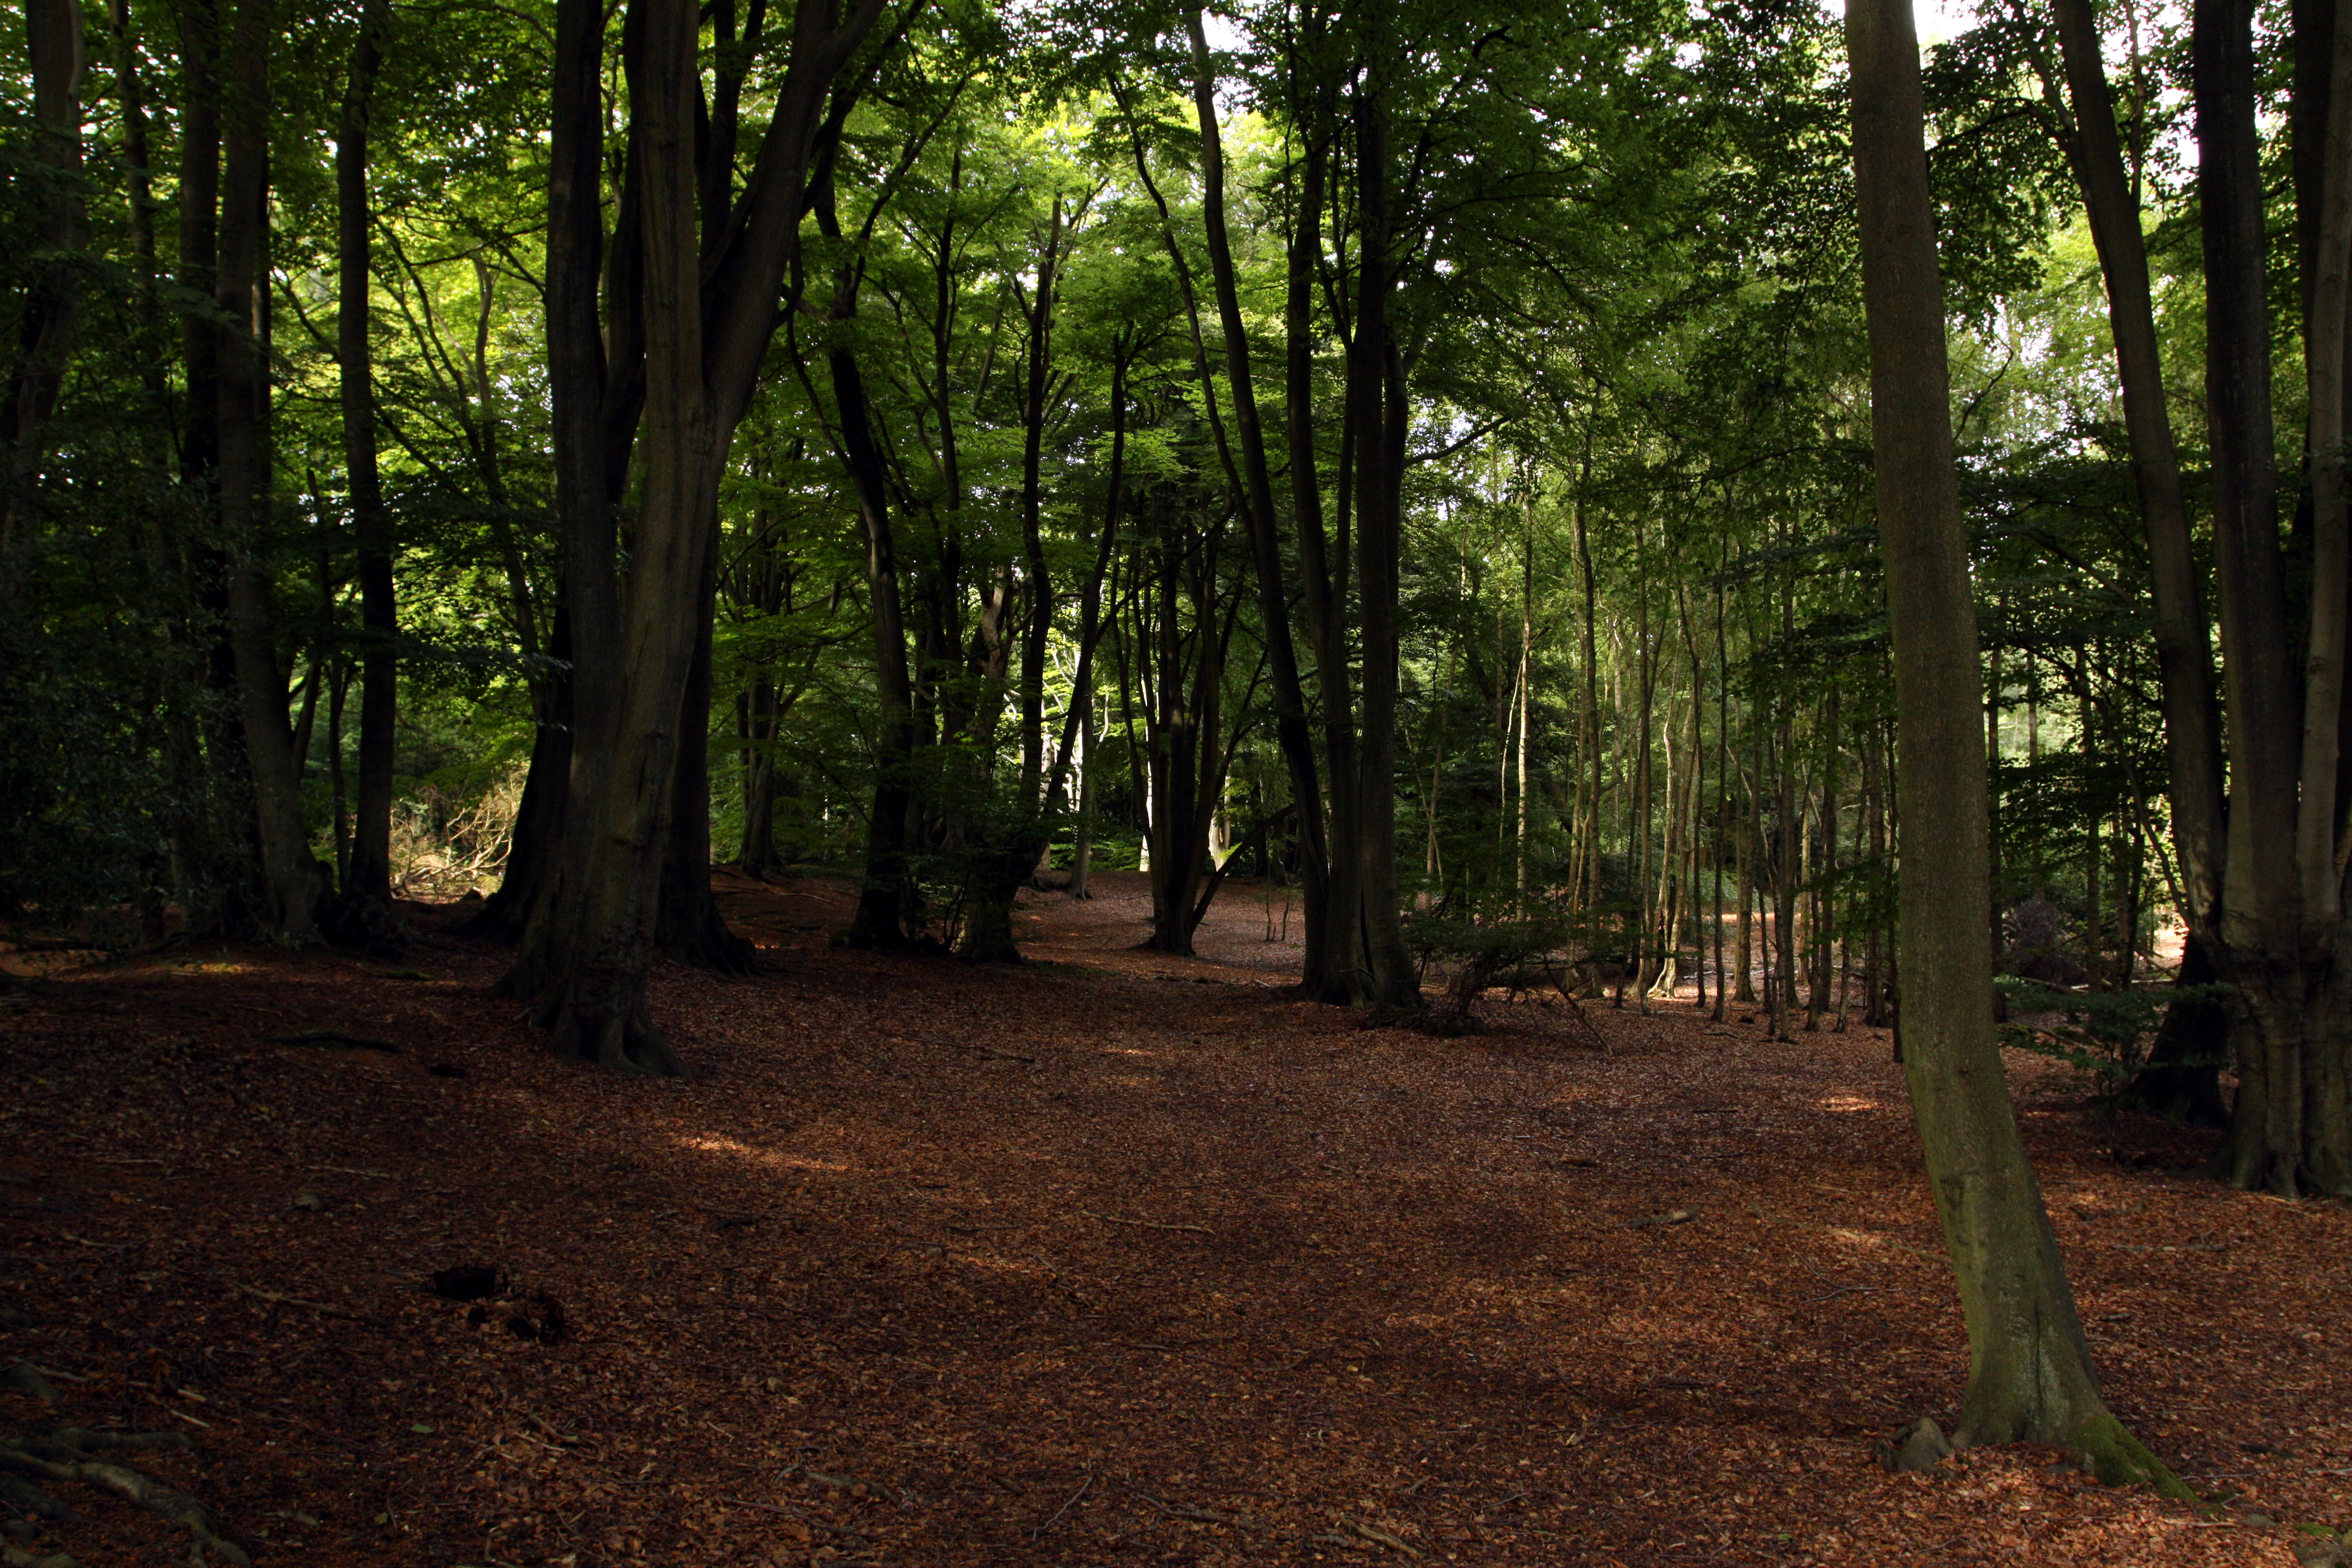 File:Epping Forrest in London, August 2013 (2).JPG - Wikimedia Commons